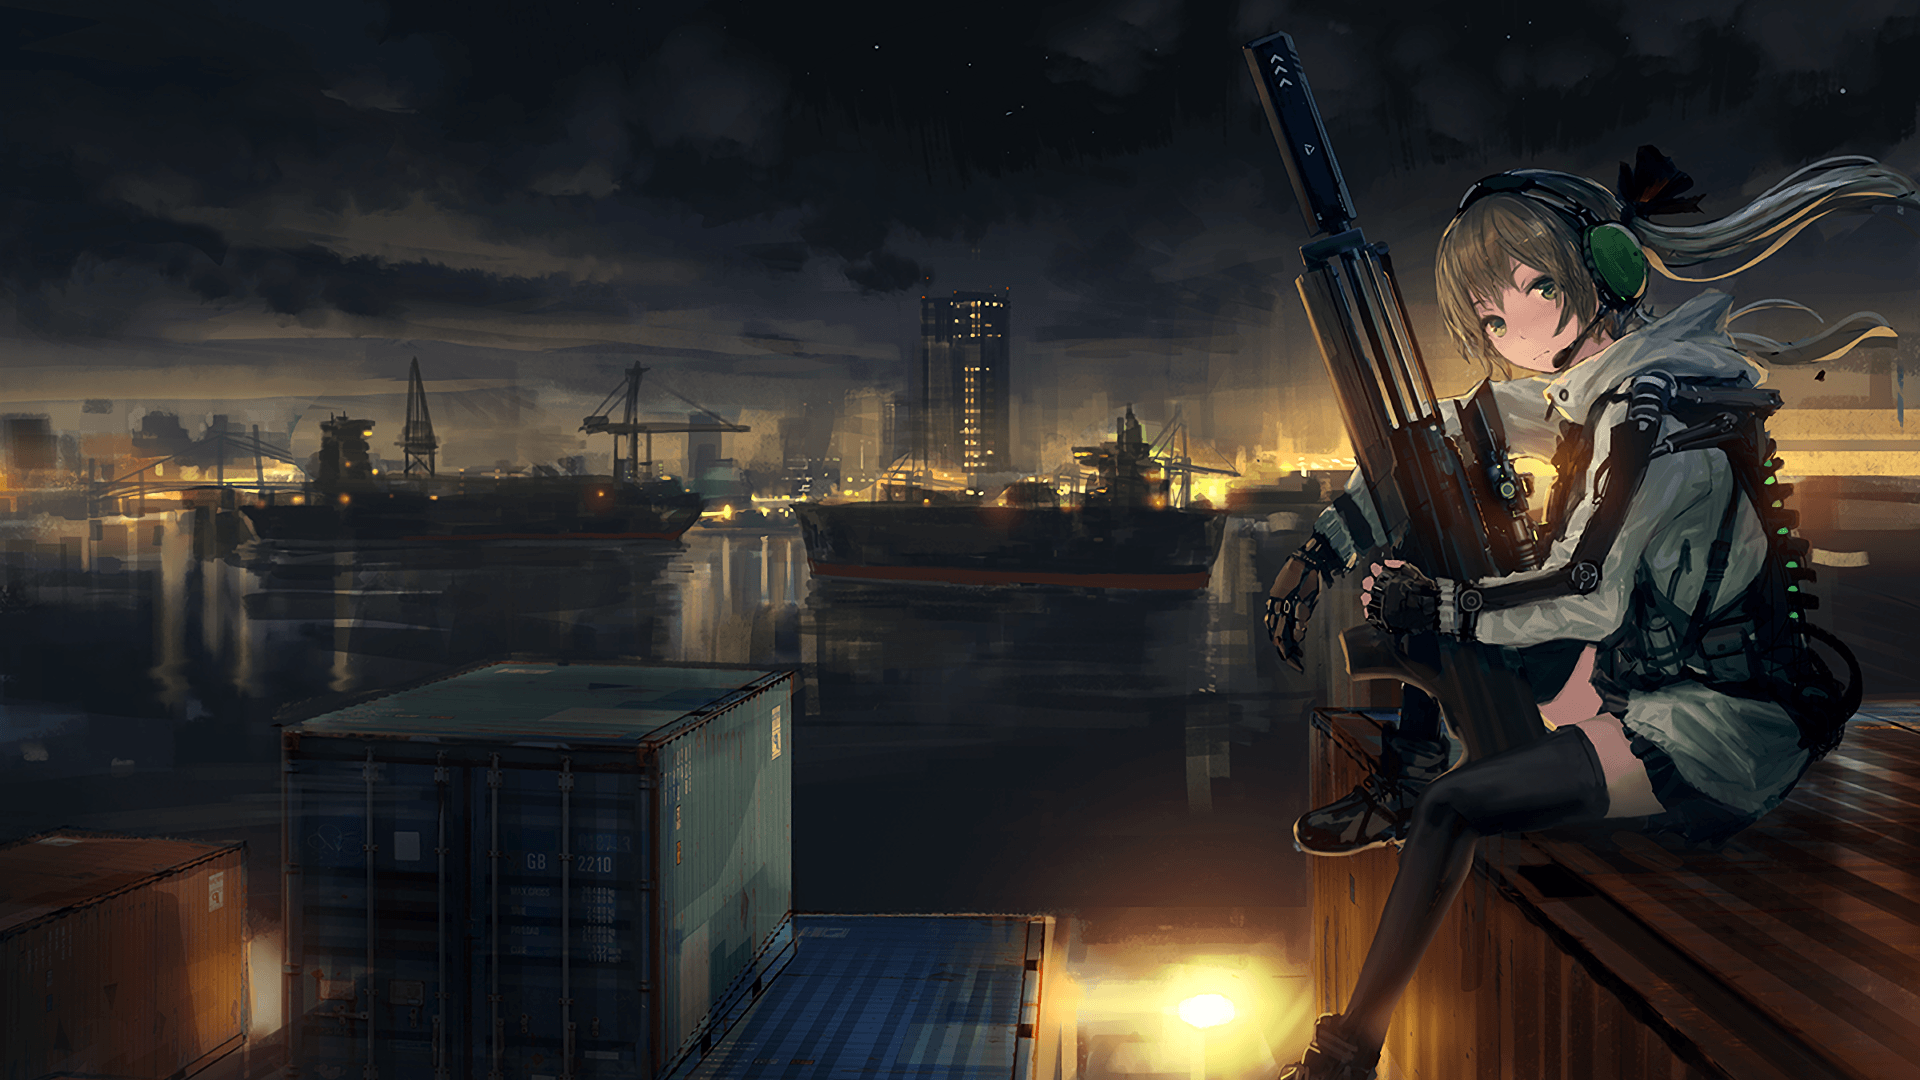 Download 1920x1080 Anime Girl, Soldier, Sitting, Sniper, Artwork Wallpaper for Widescreen